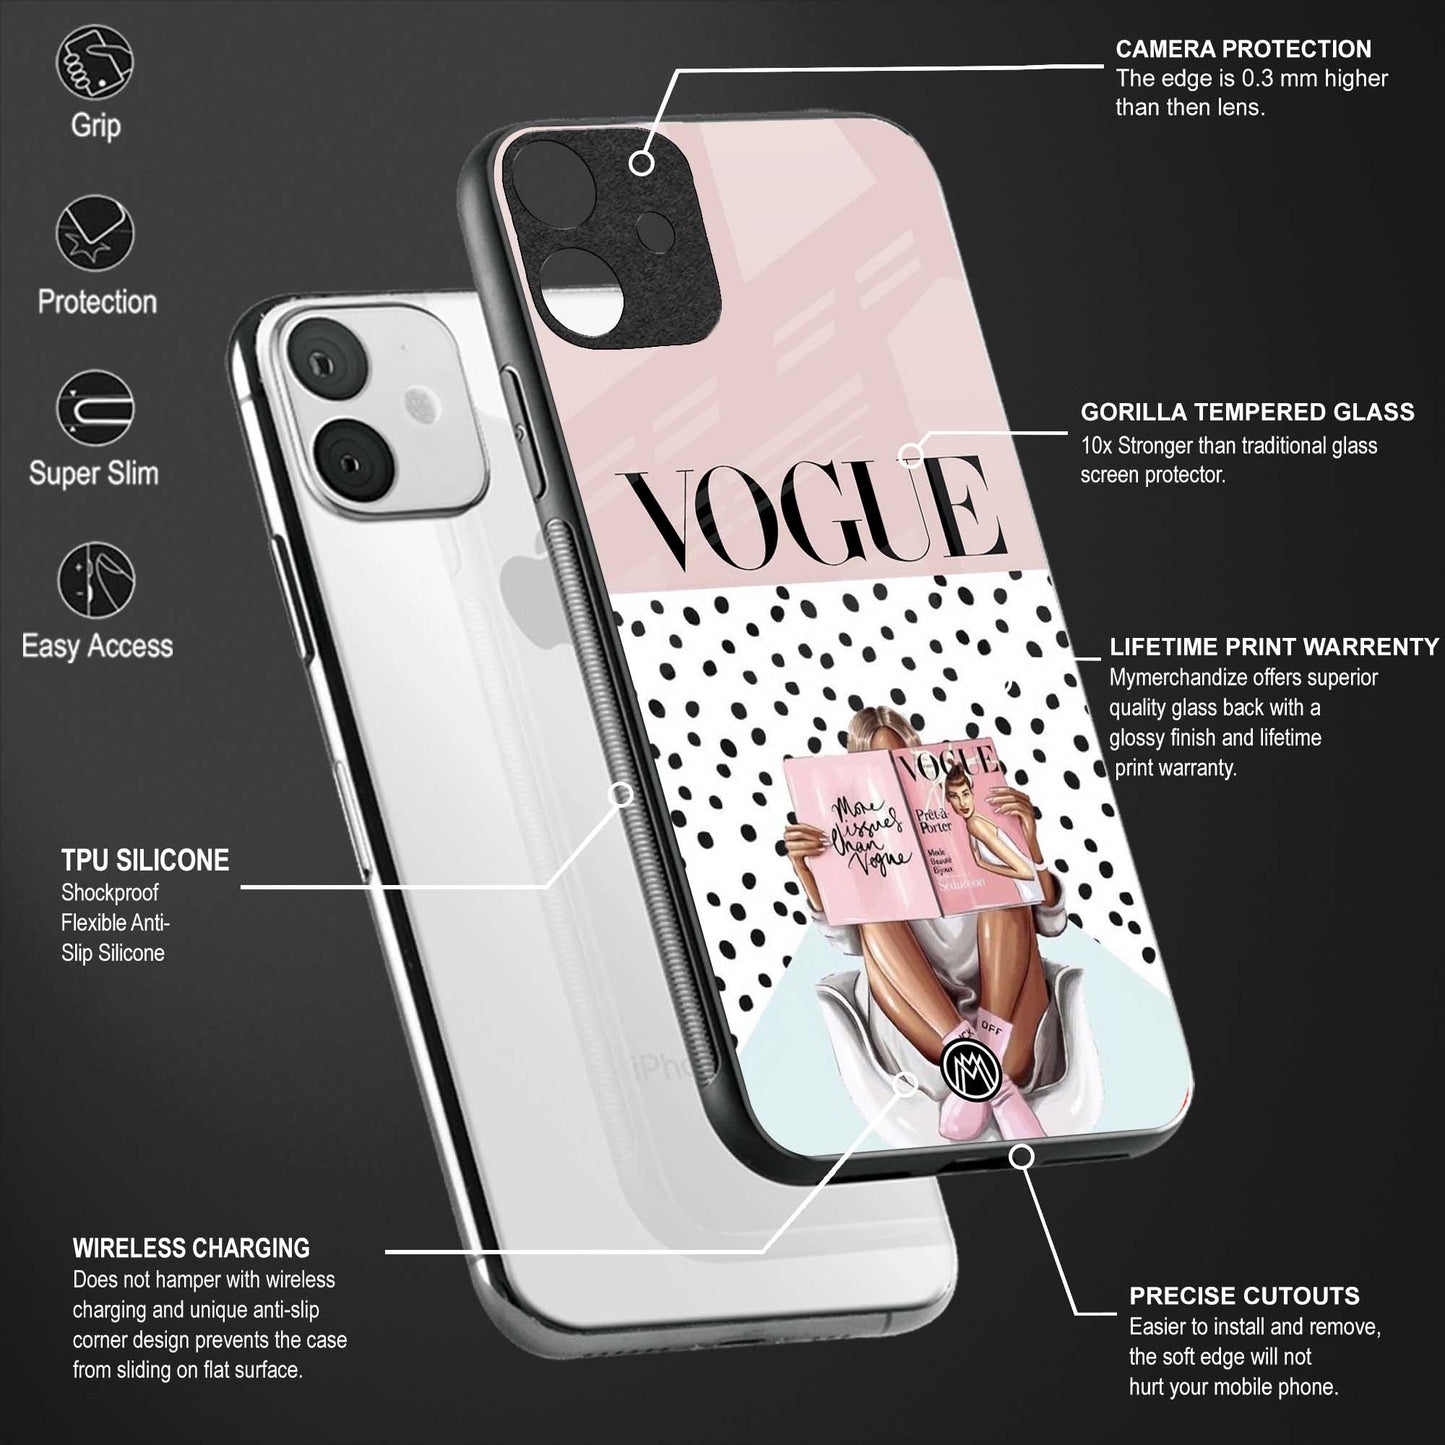 vogue queen glass case for oneplus 7 pro image-4